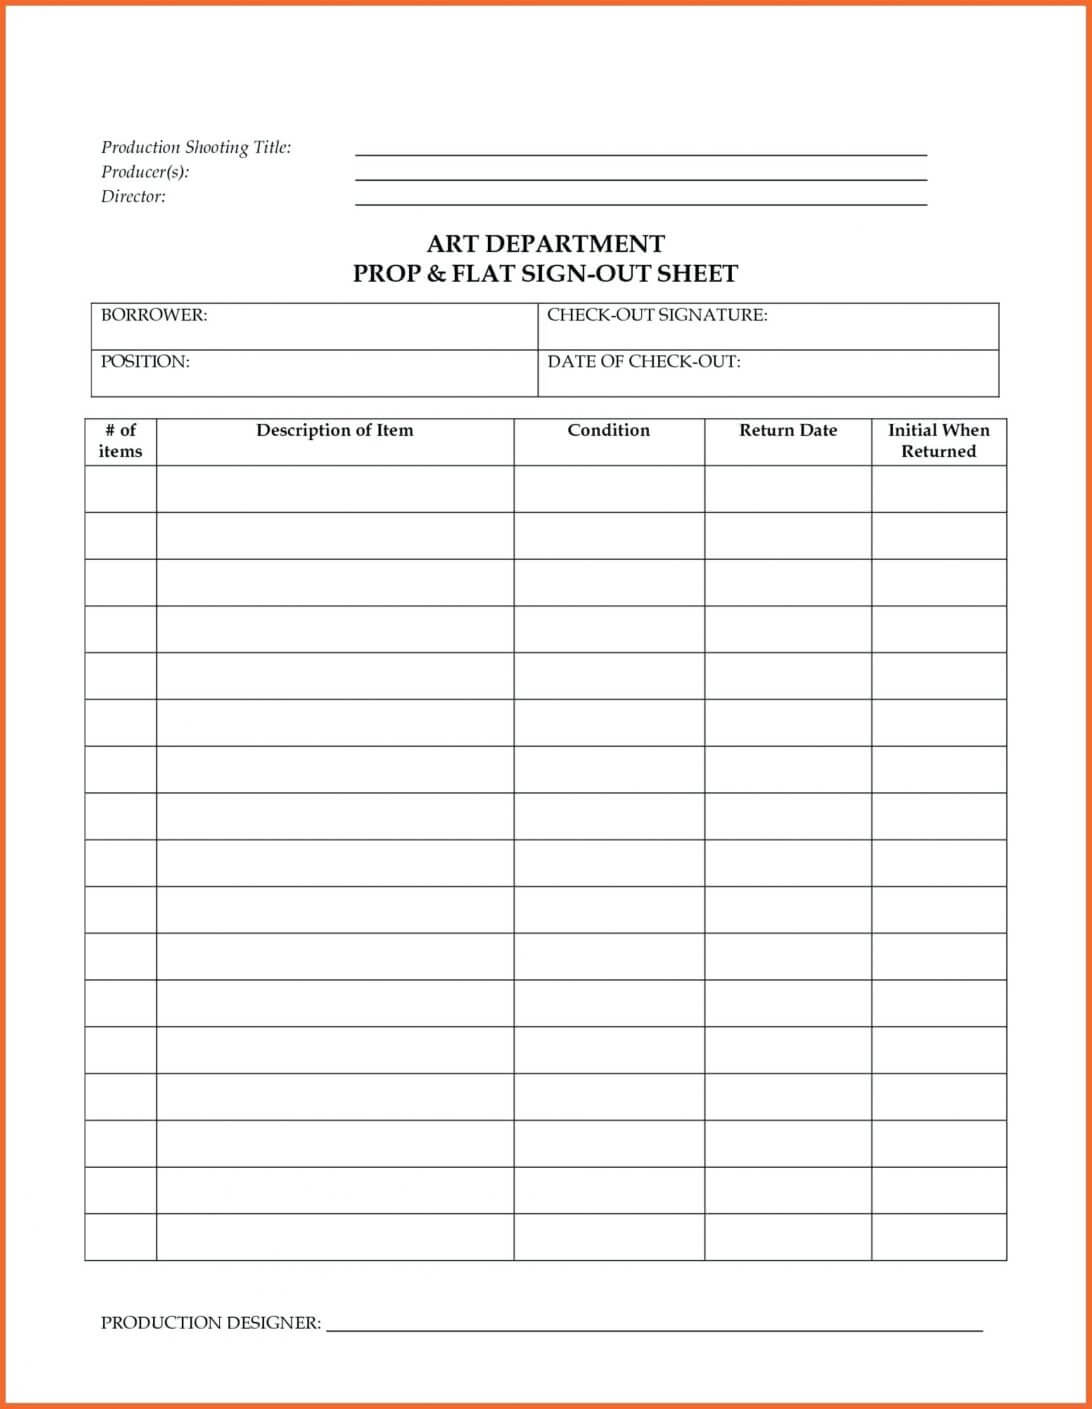 Petition Signature Form Ideal.vistalist.co 26+ Template With Regard To Blank Petition Template